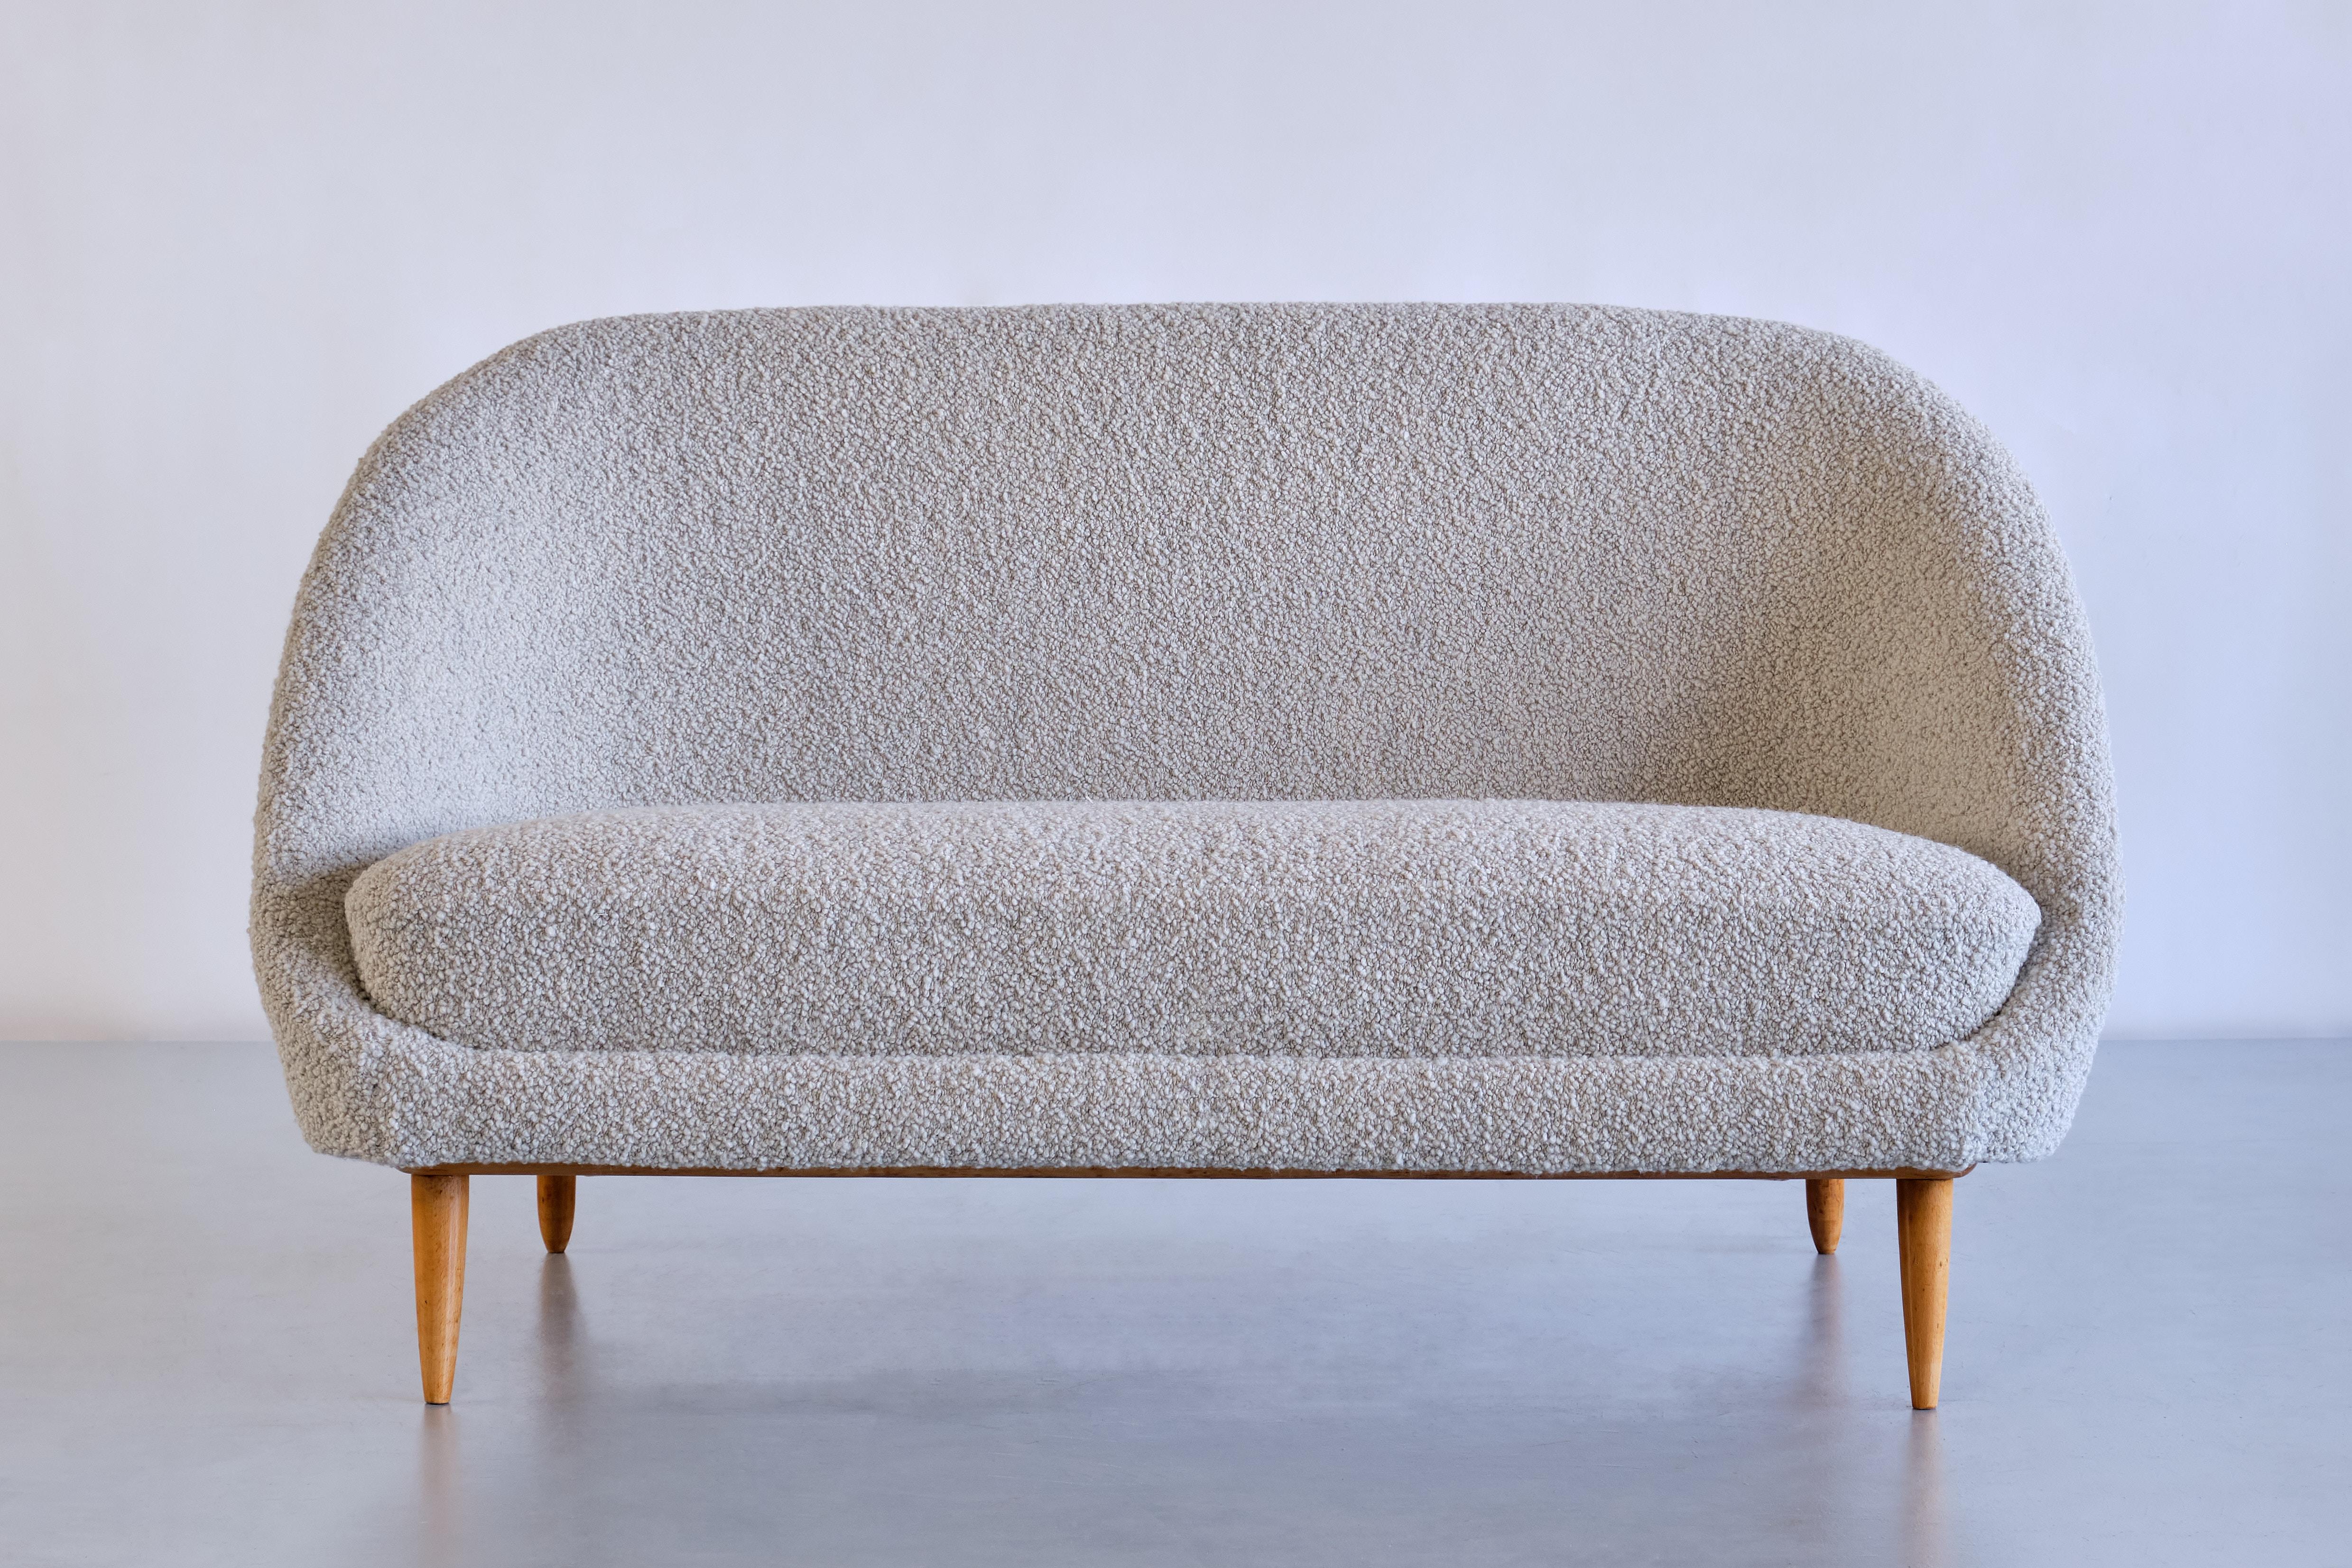 This striking sofa was designed by Theo Ruth in 1958. This model numbered 115 was produced by Artifort in the Netherlands.

The design is marked by the rounded lines of the upholstered seat and the slightly angled positioning of the seat on the